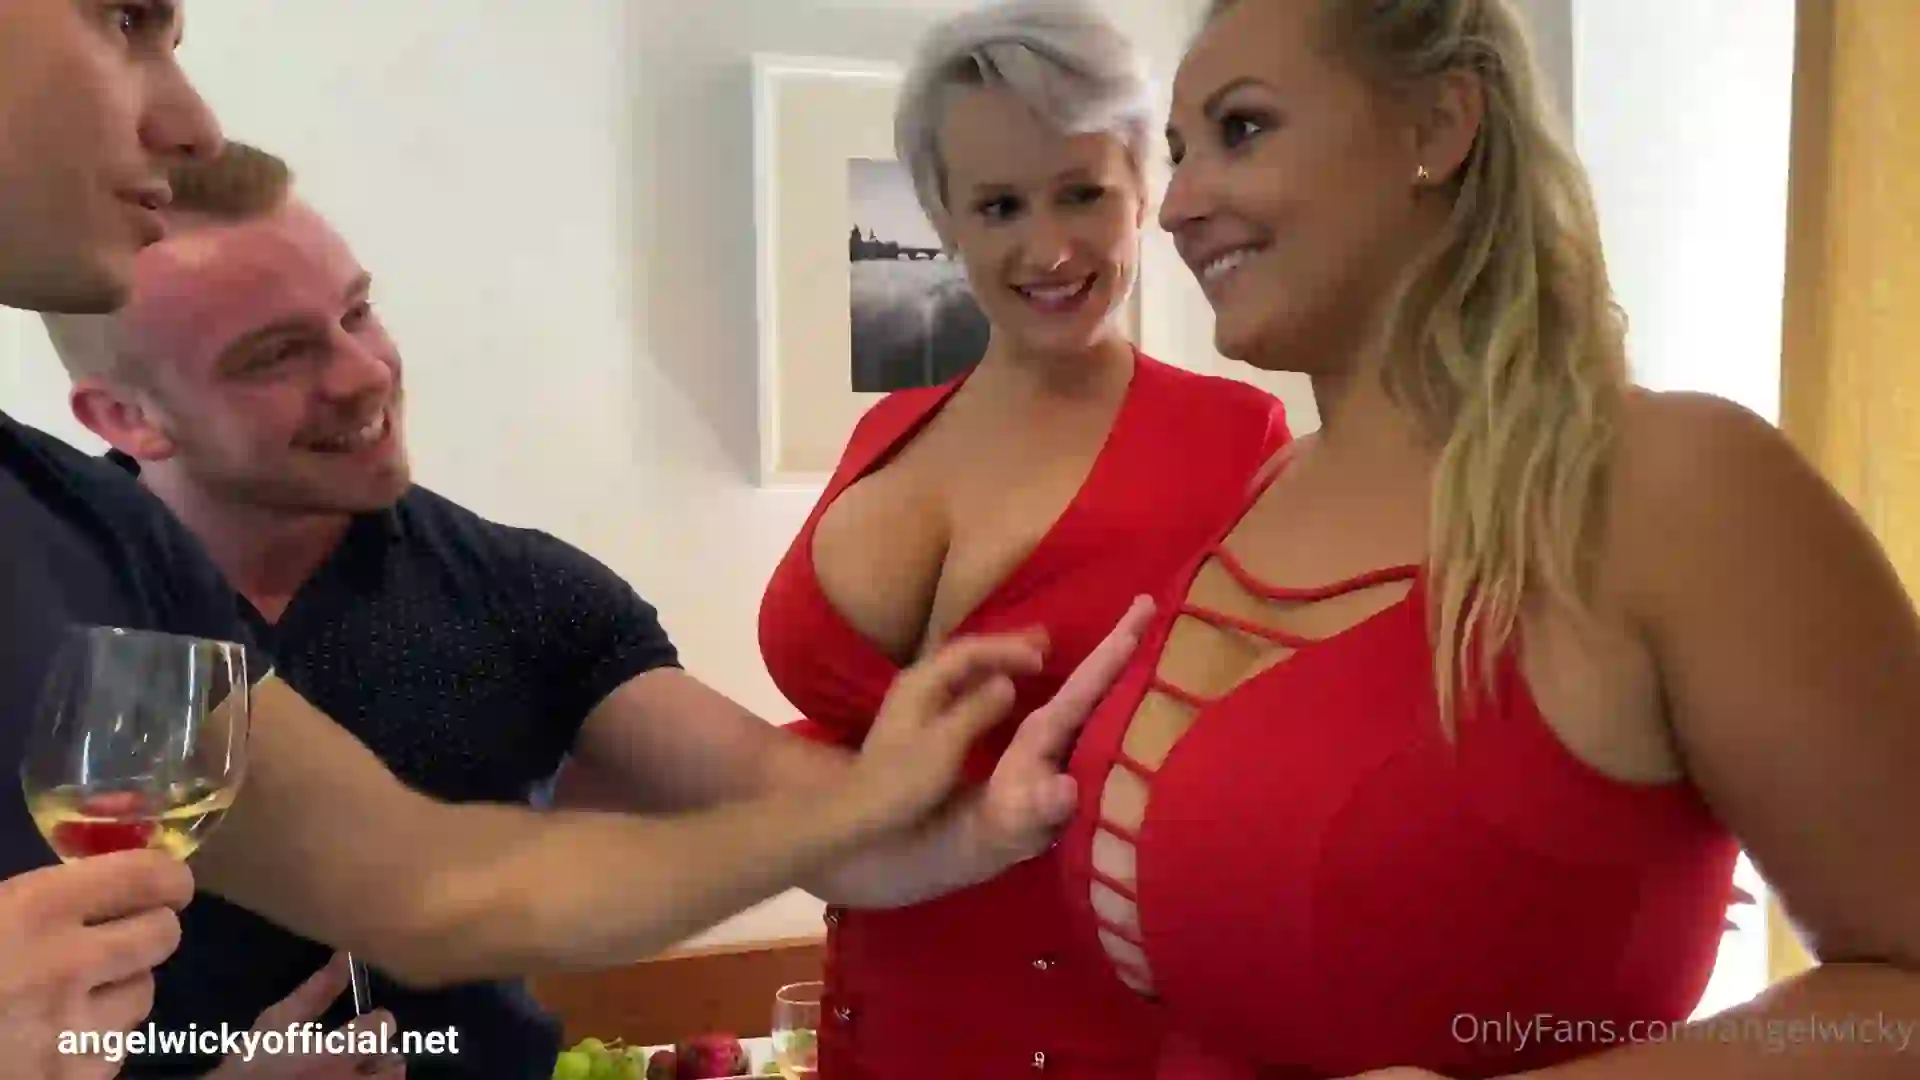 OnlyFans-Angel Wicky and Krystal Swift-Big Girls Big Boobs Foursome-2021-1080p